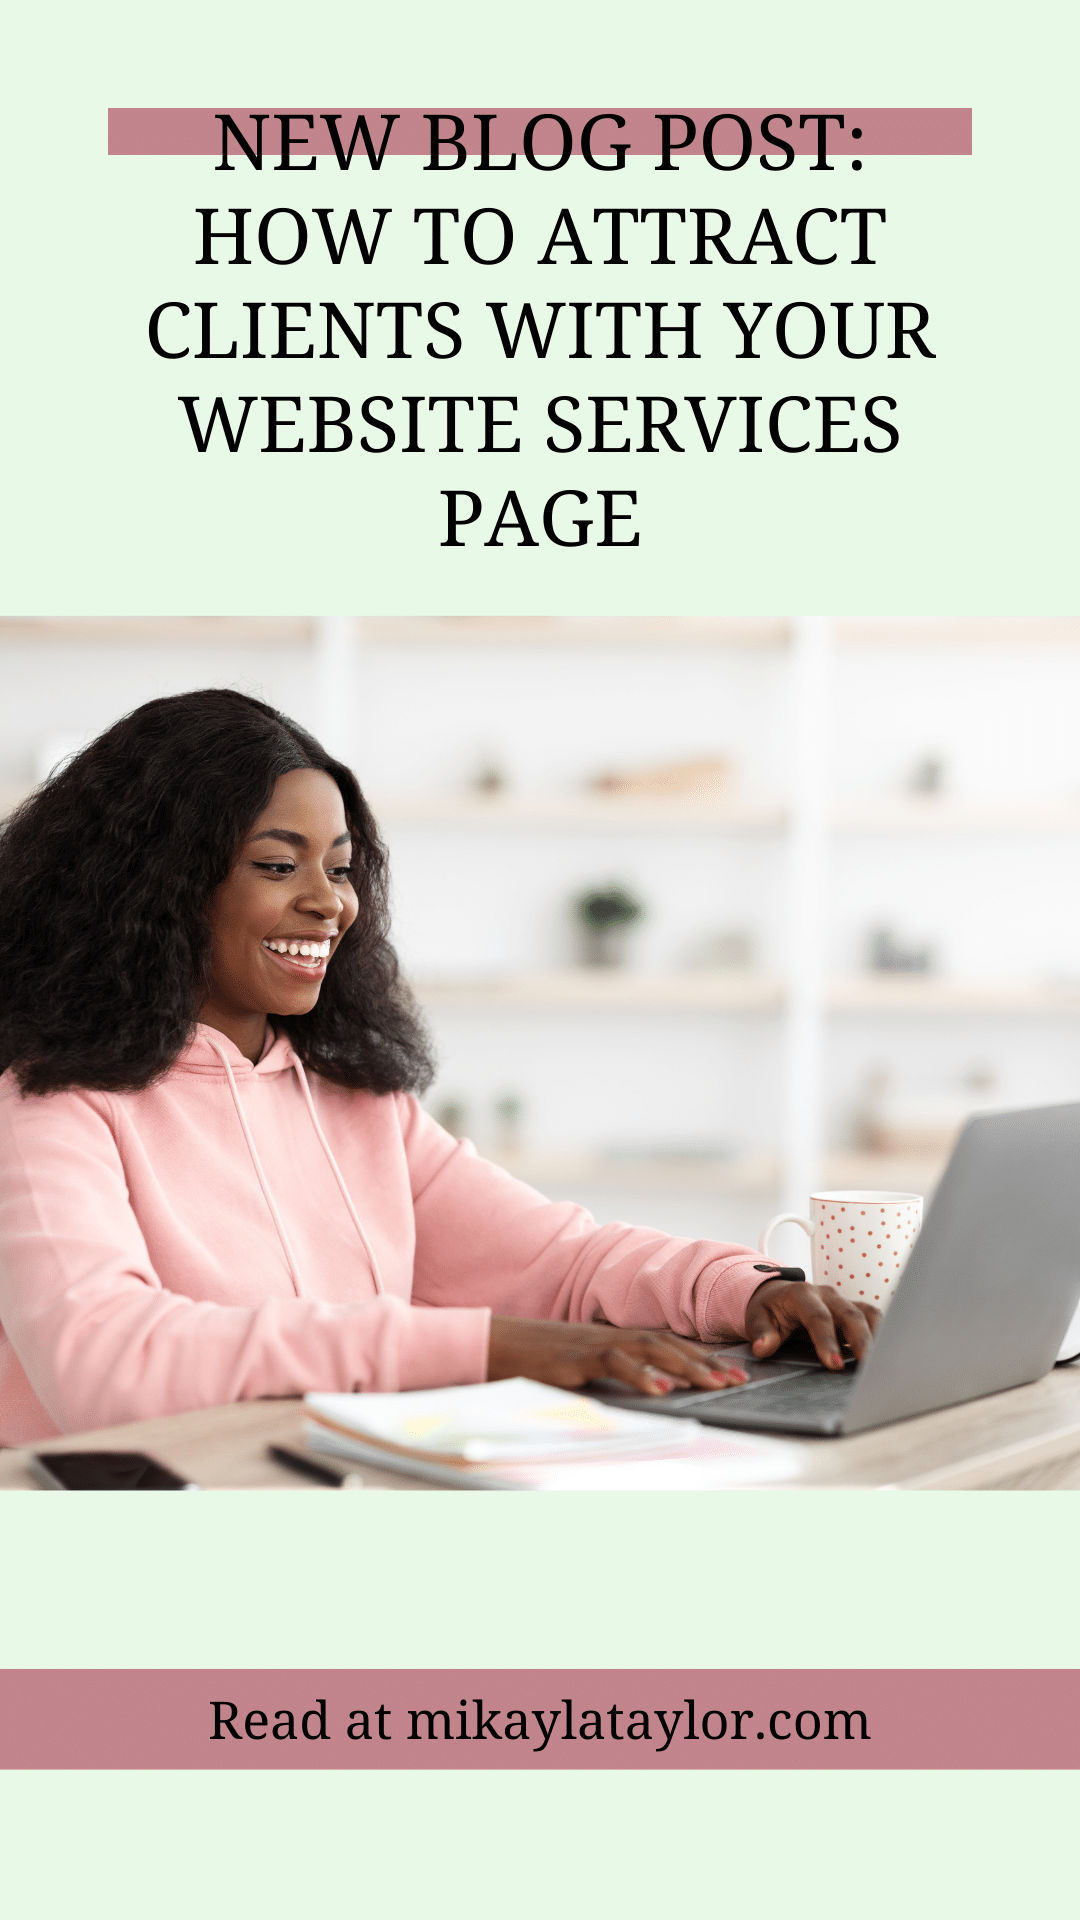 How to Attract Clients with your Website Services Page Pinterest2